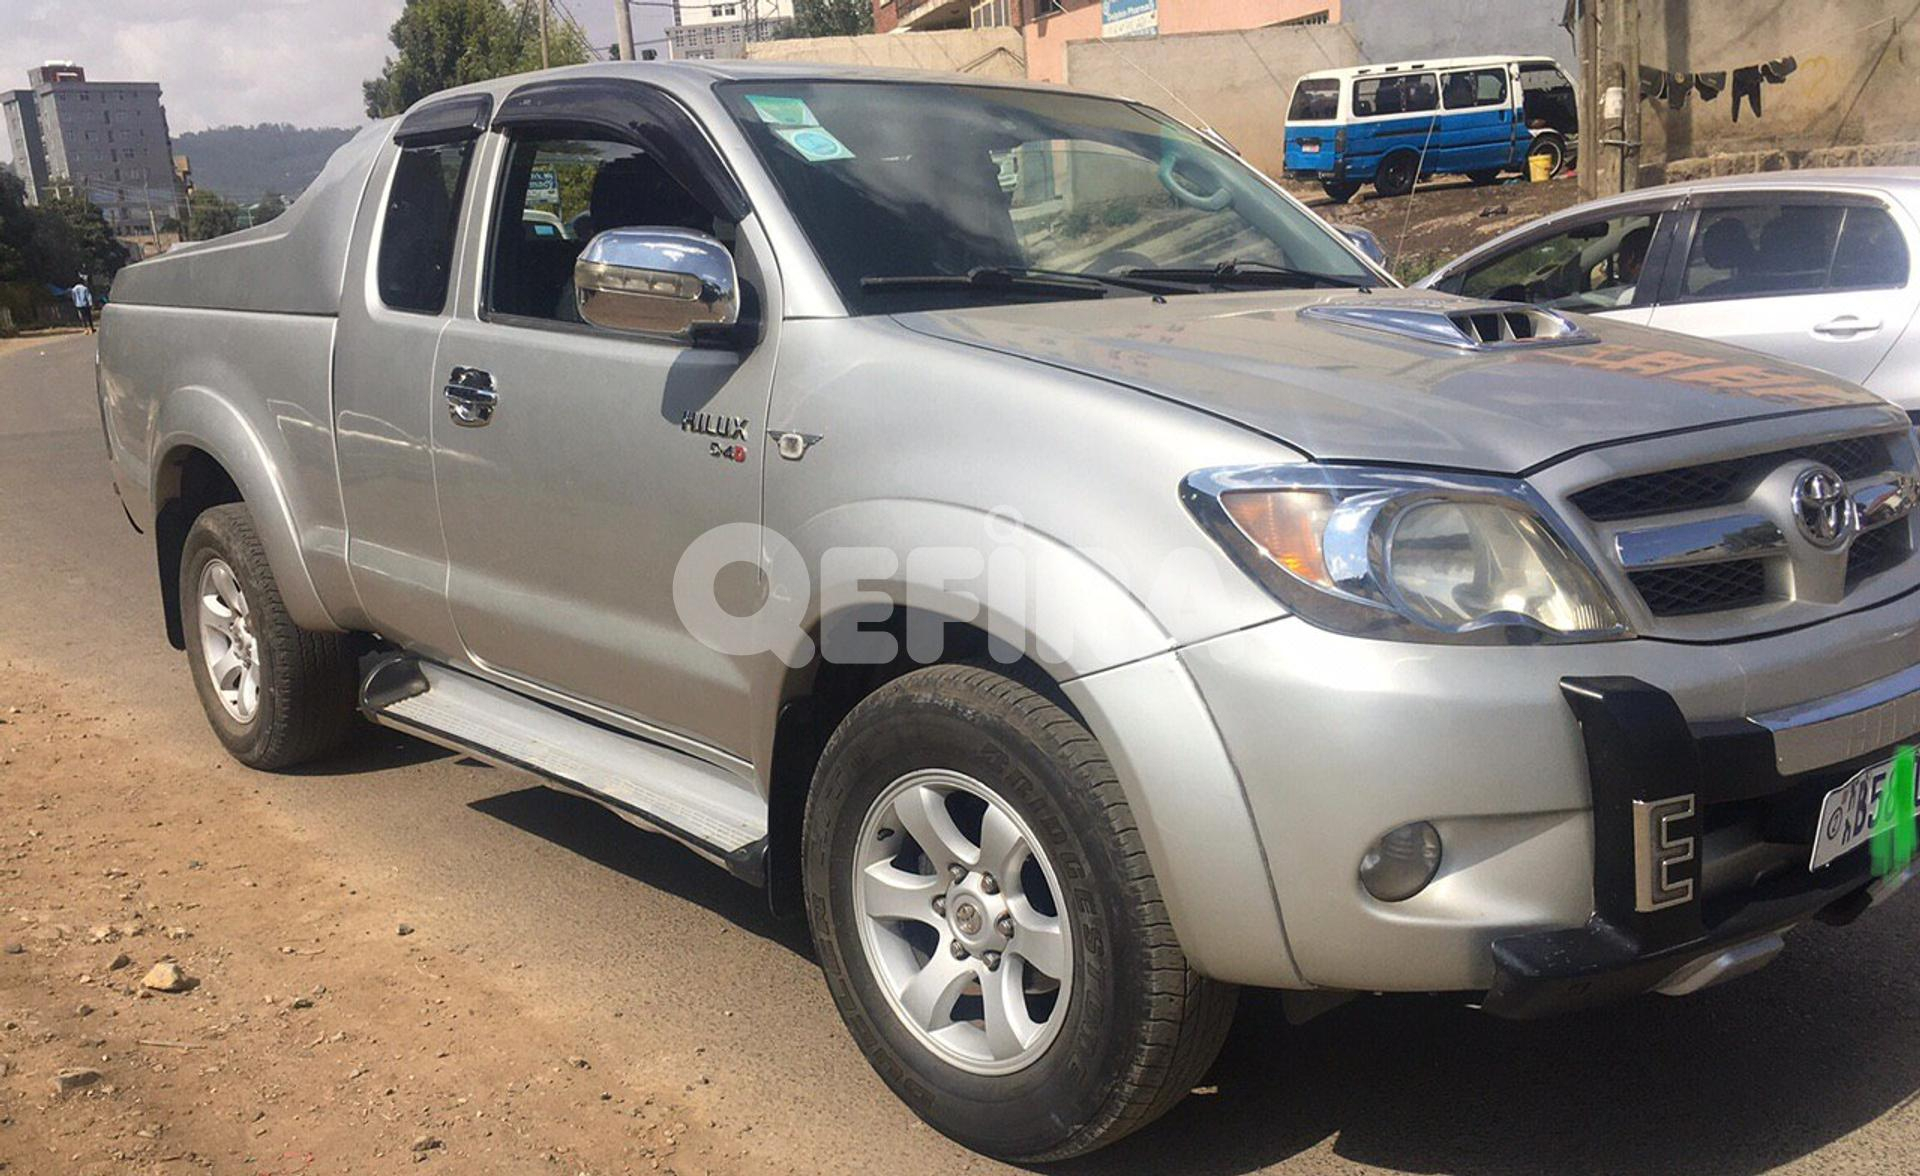 2008 Model Toyota D4D In Addis Ababa | Qefira intérieur Toyota Addis Ababa